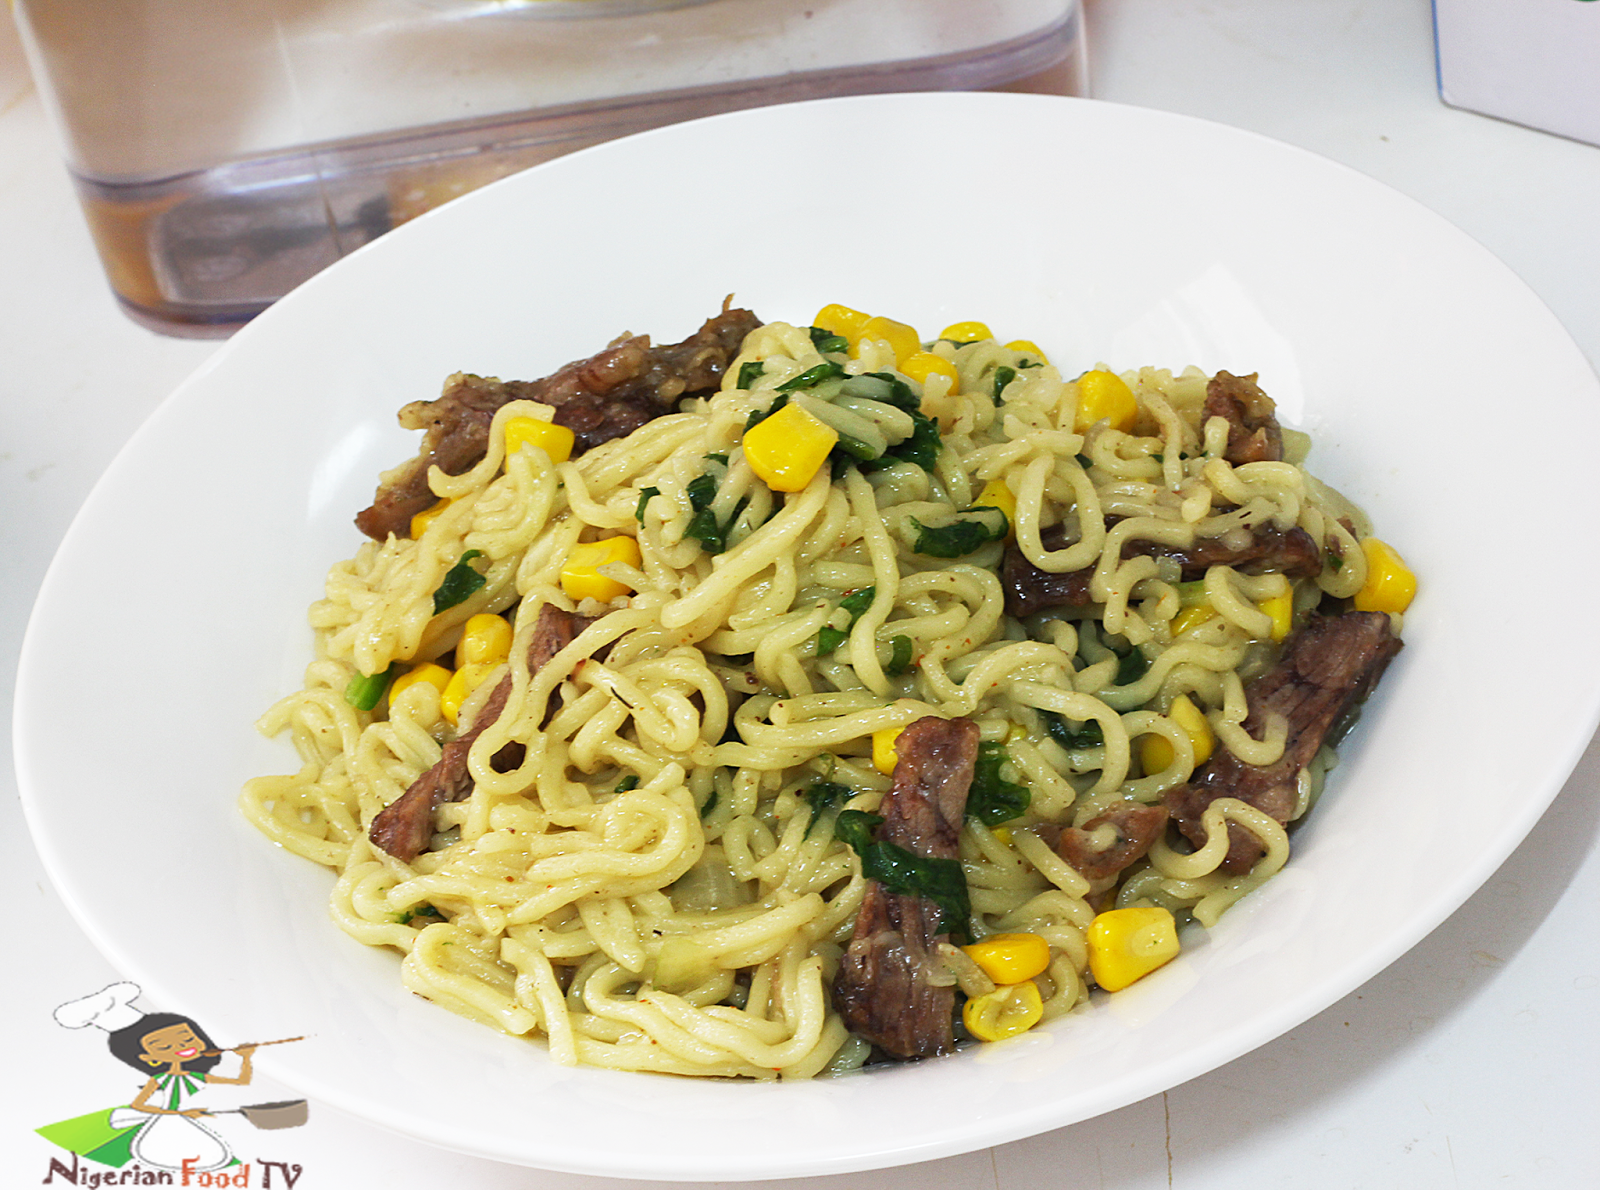 Spinach-Sweet Corn and Beef Noodles